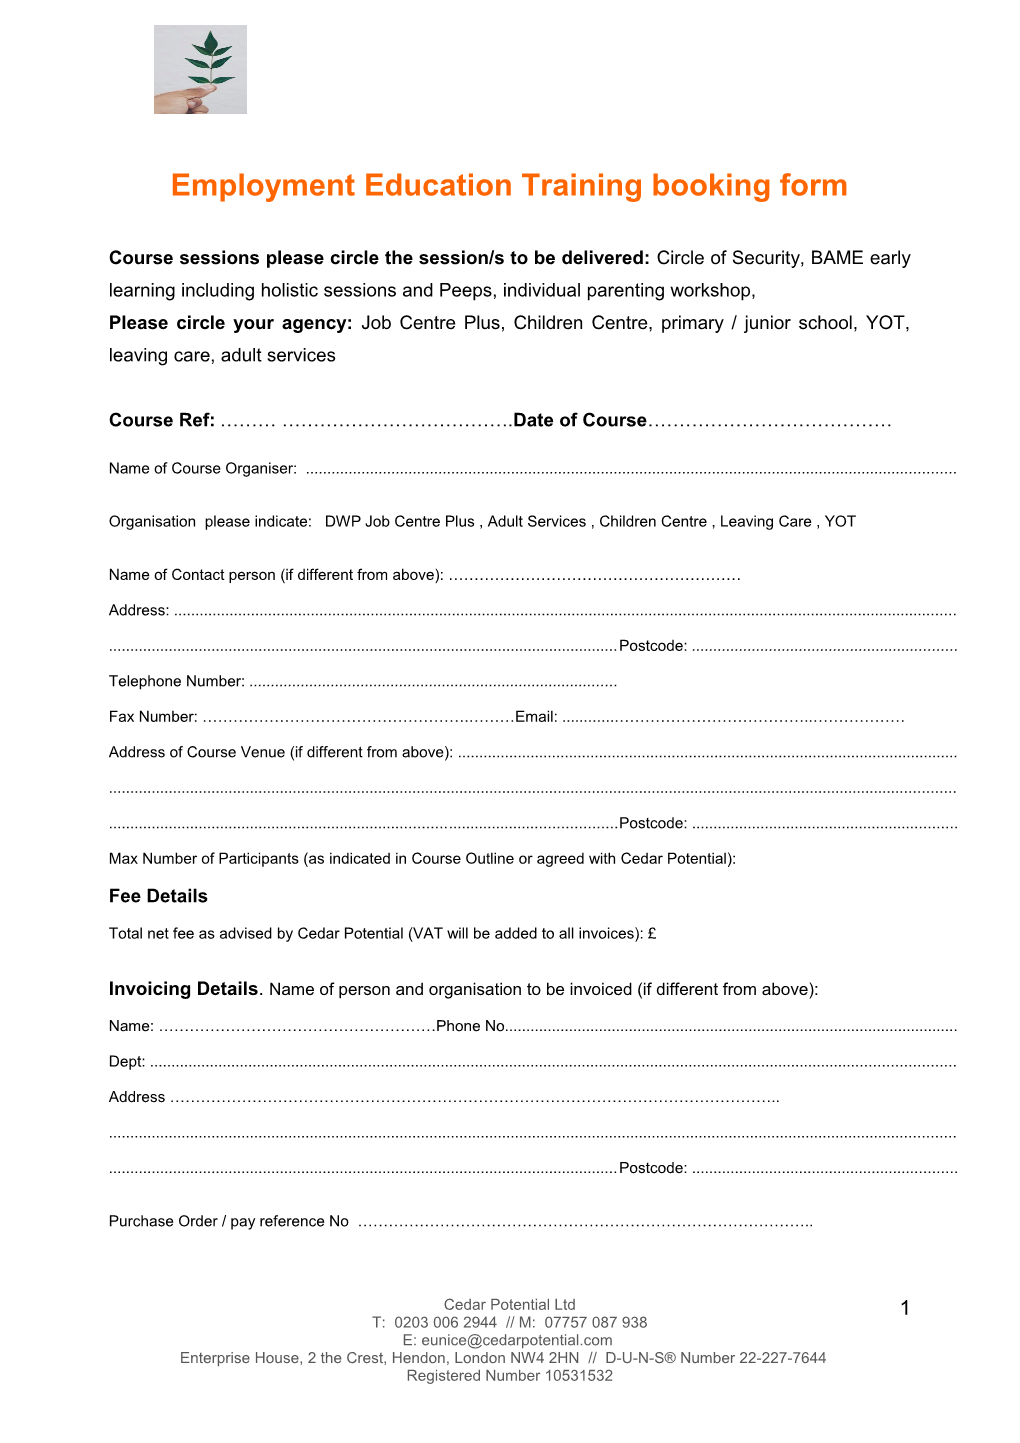 Employment Education Training Booking Form